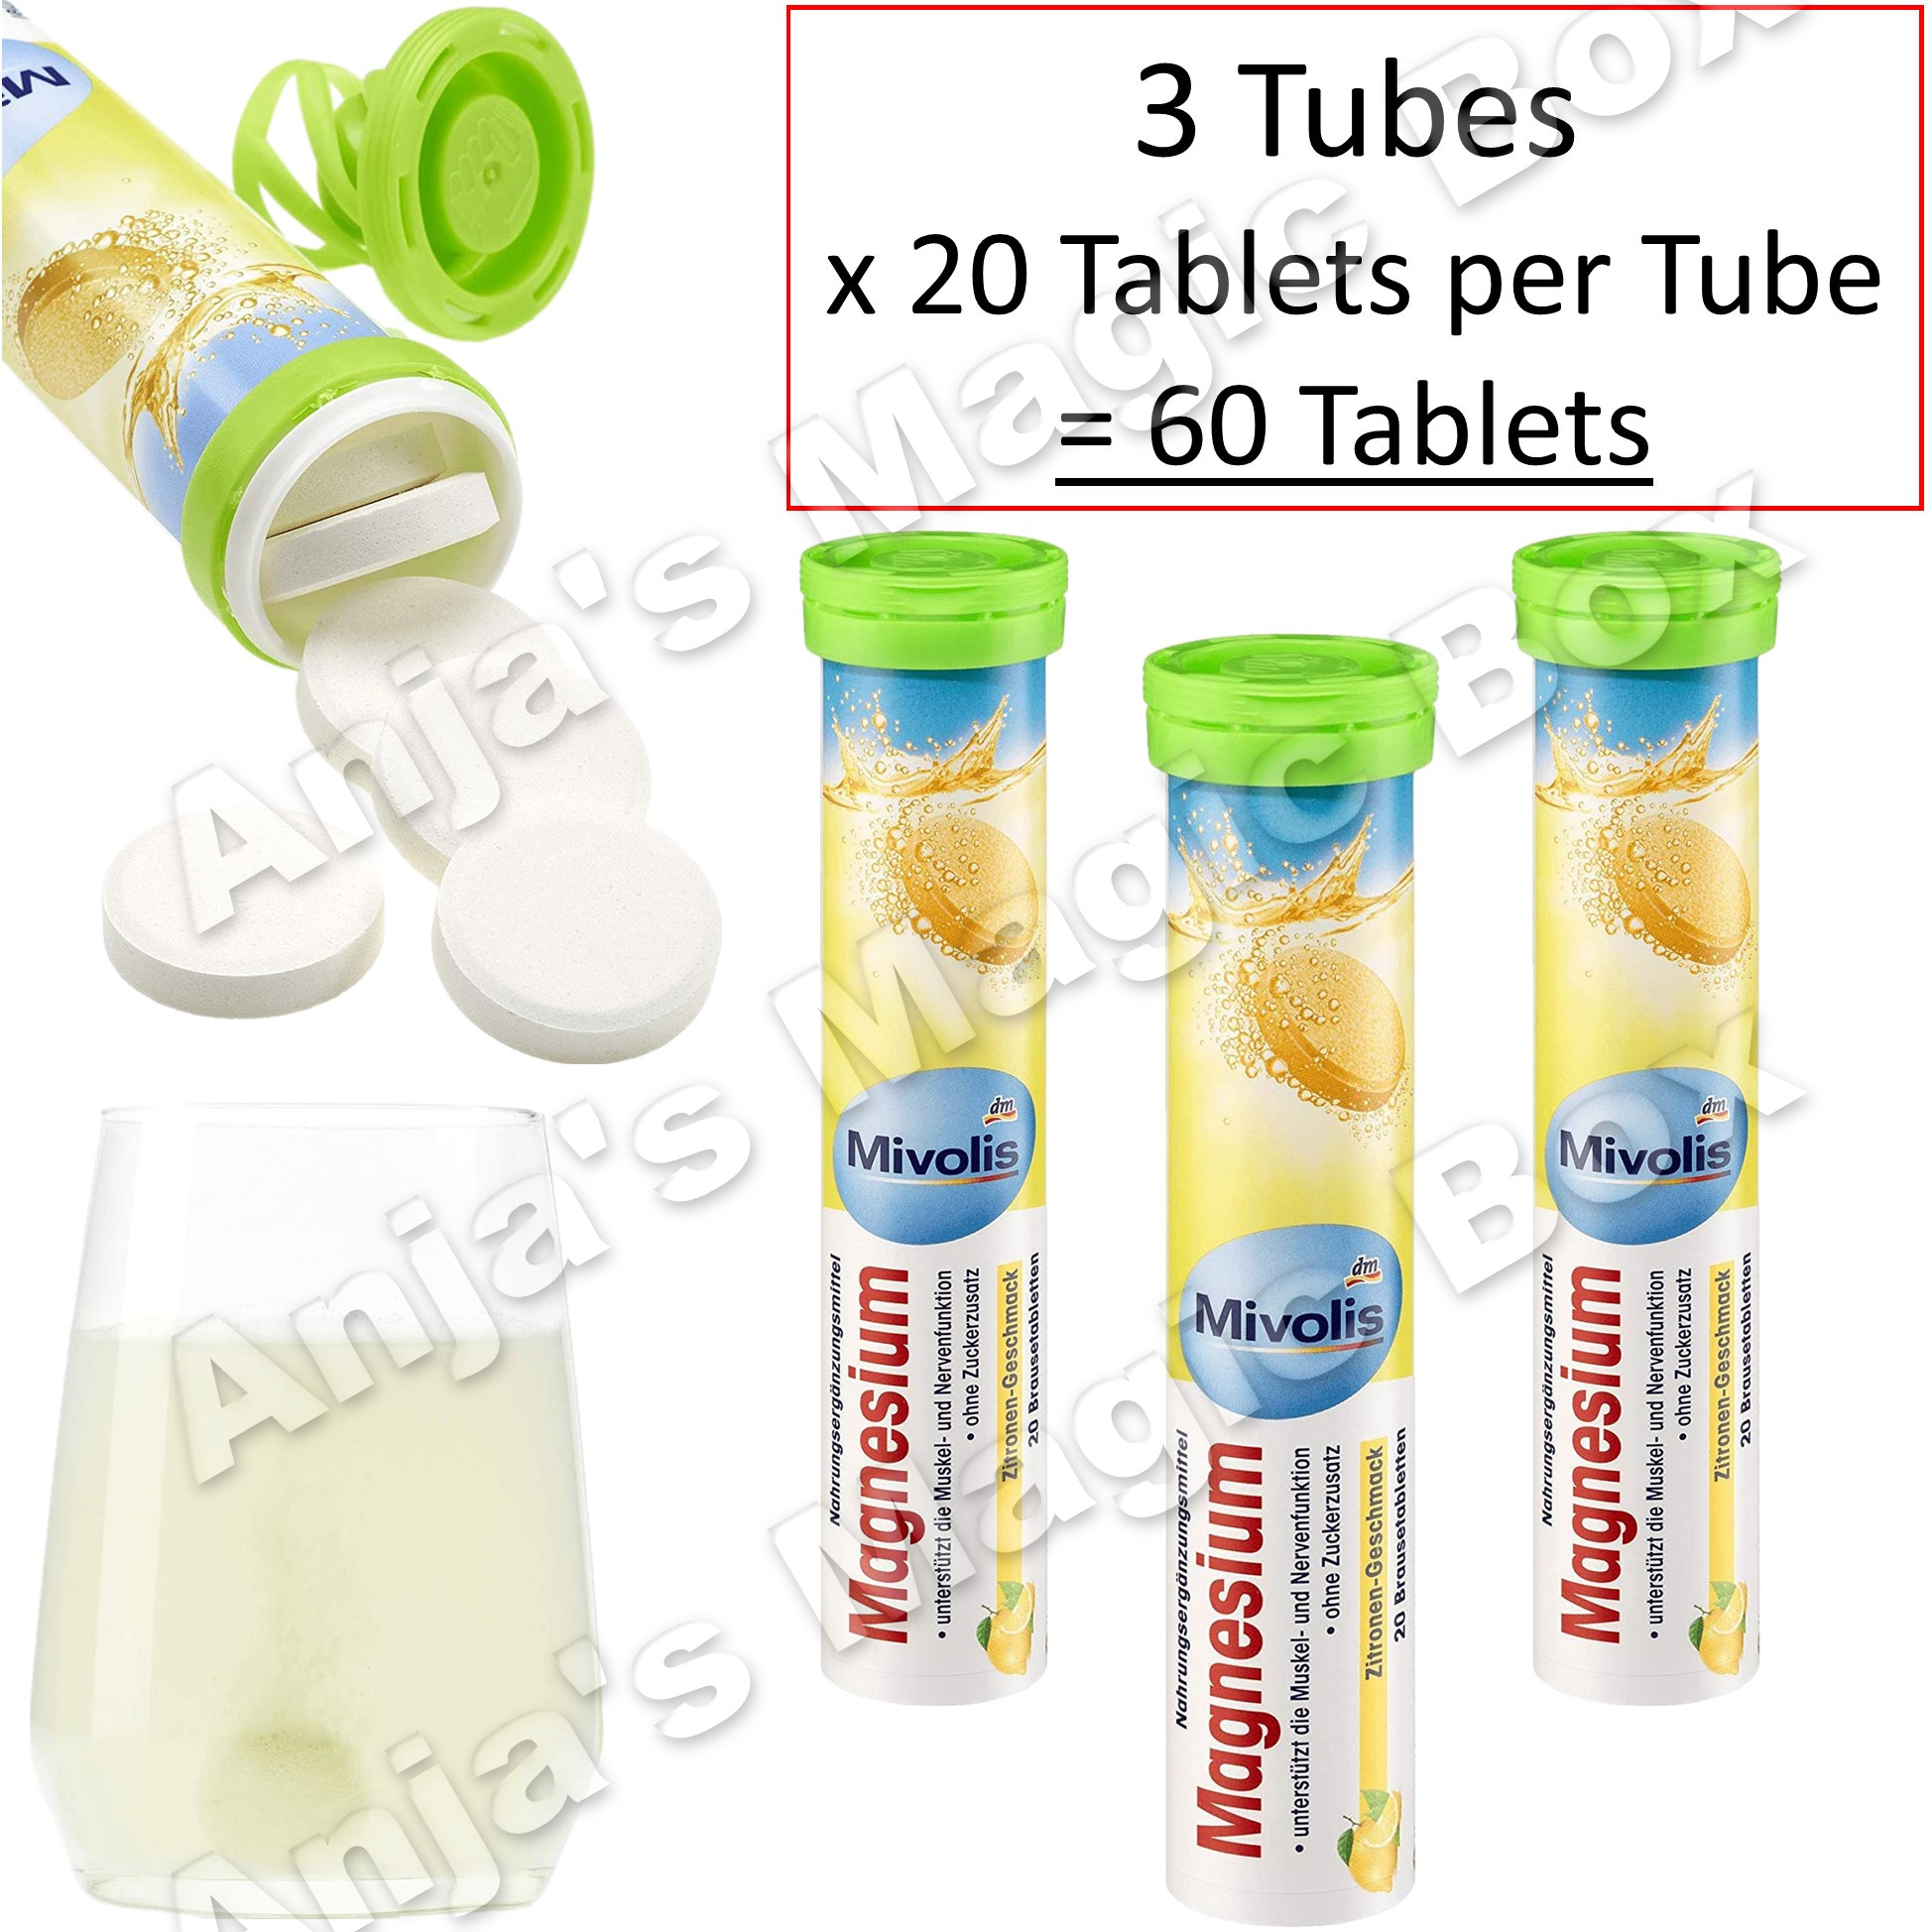 buy 3 Tubes of Magnesium Tablets on eBay